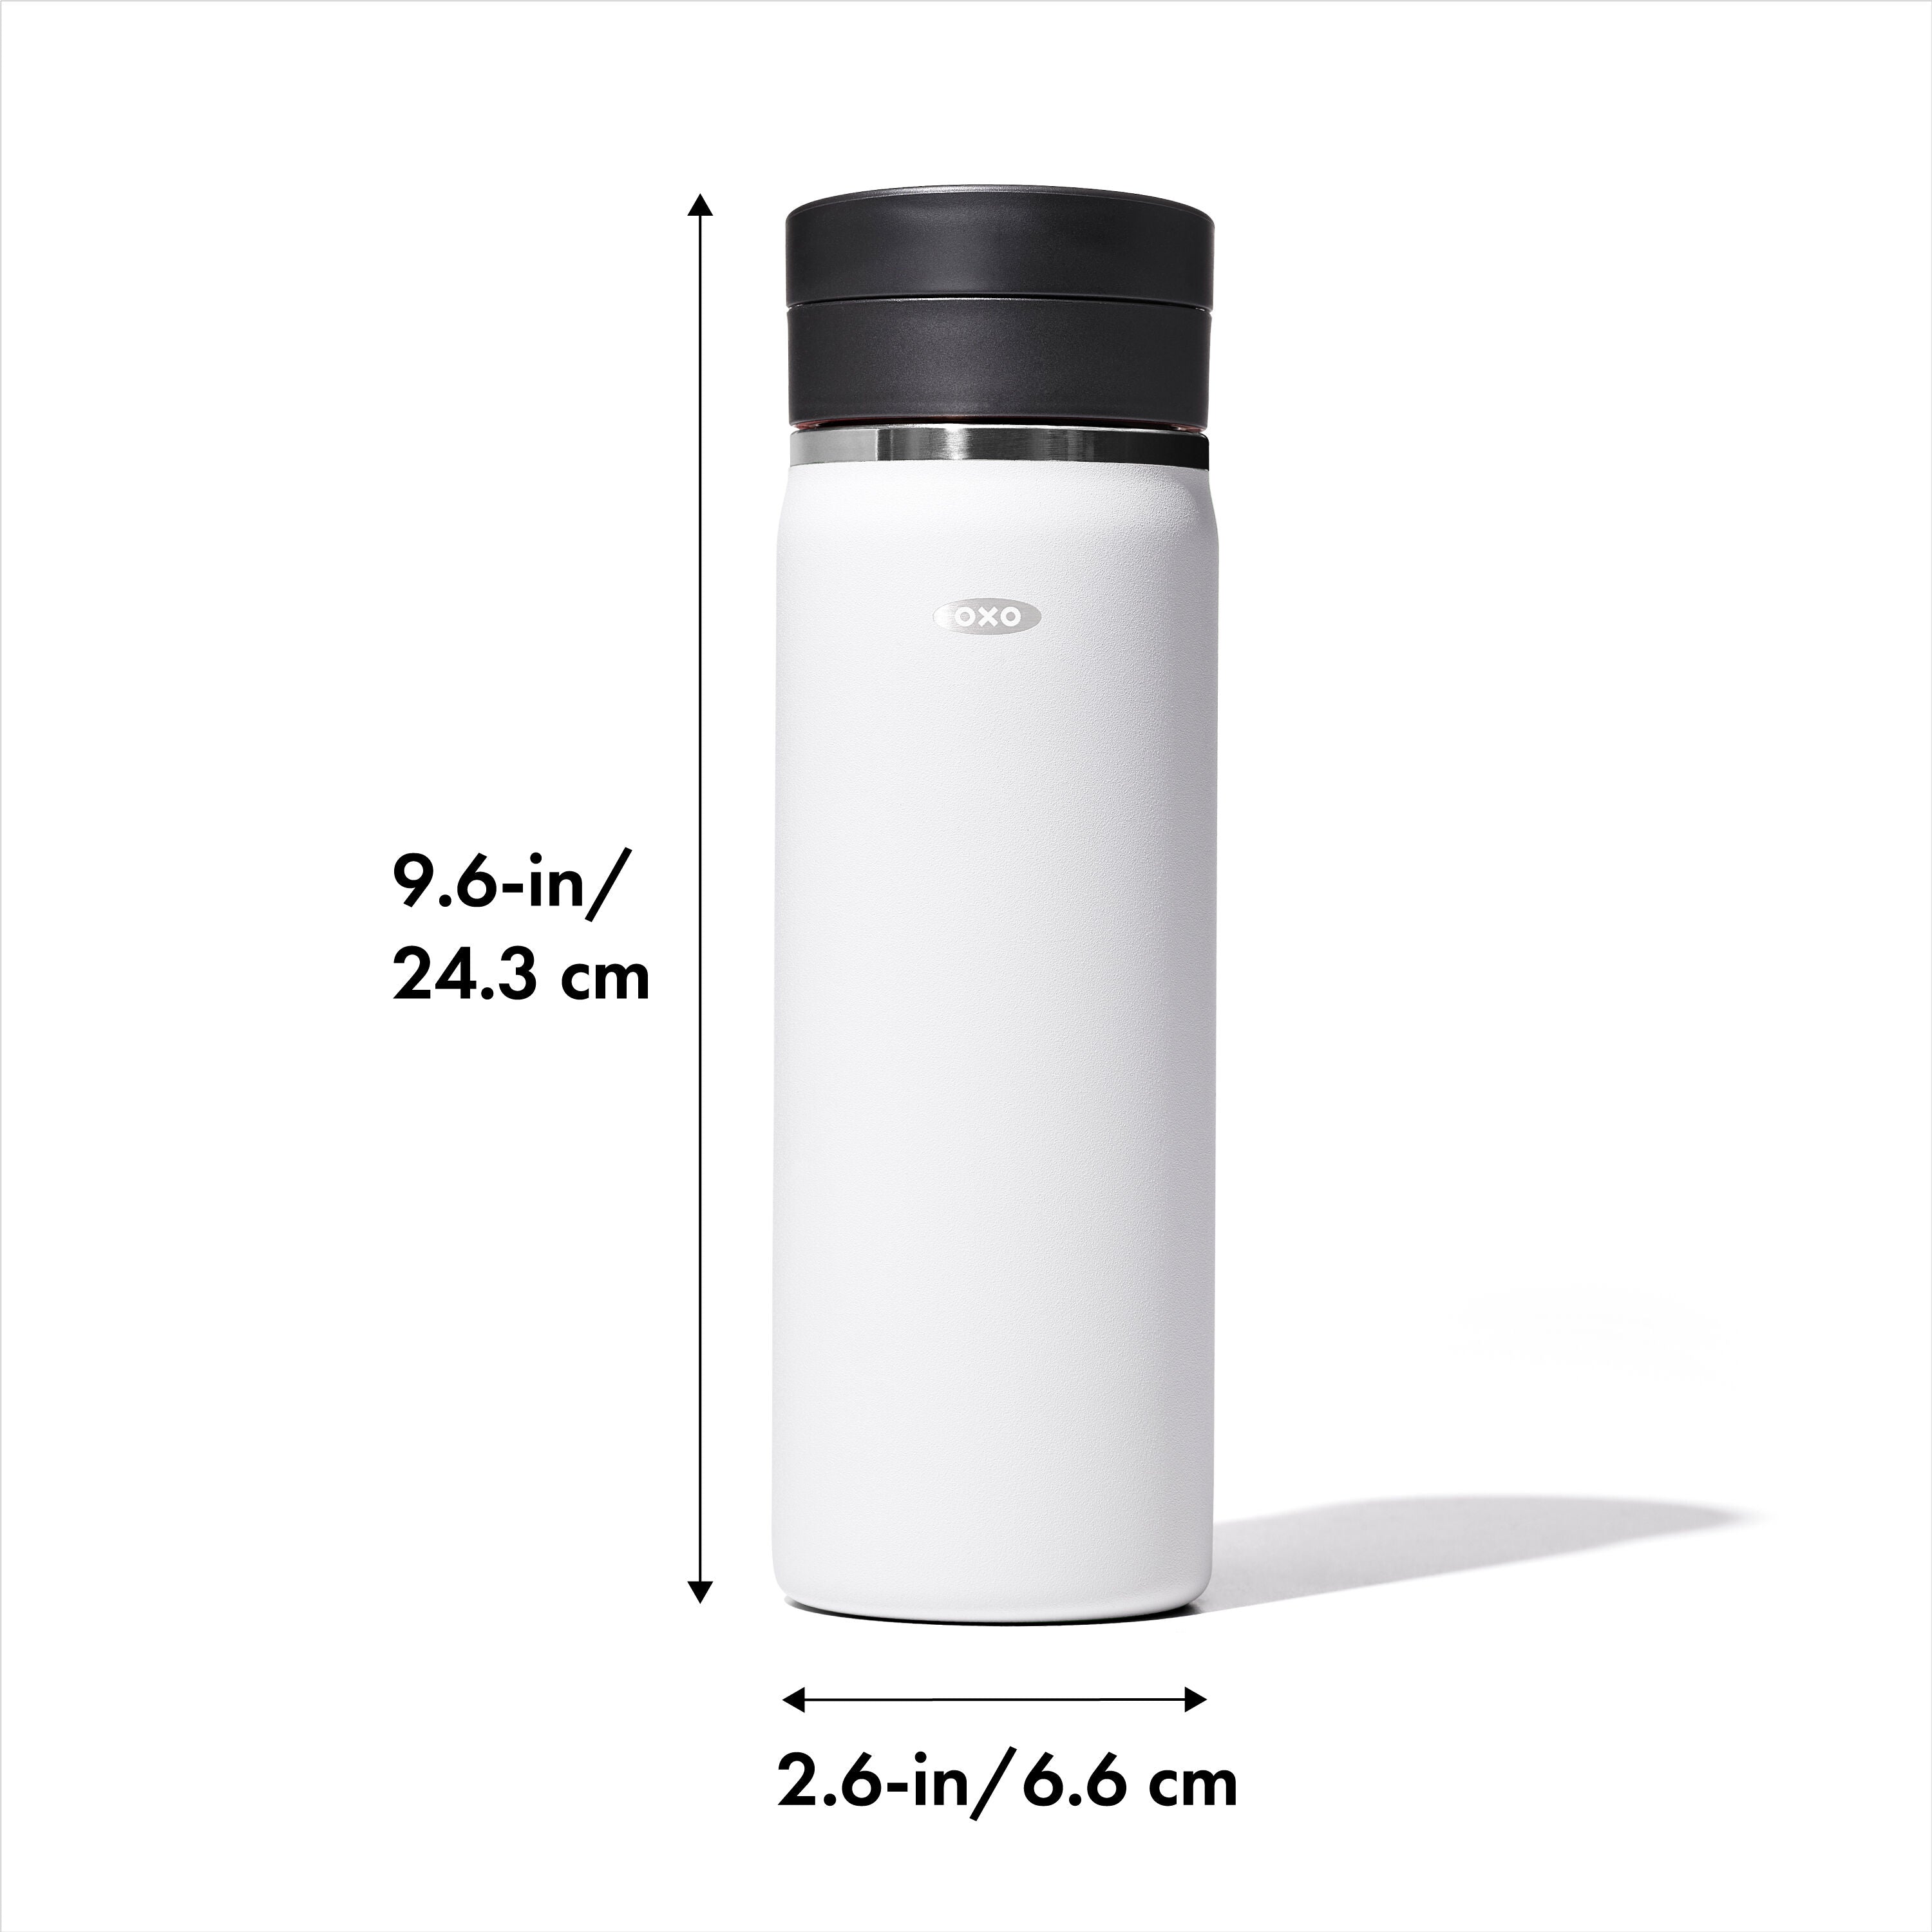 OXO Good Grips 20 oz. Thermal Mug with SimplyClean Lid – White